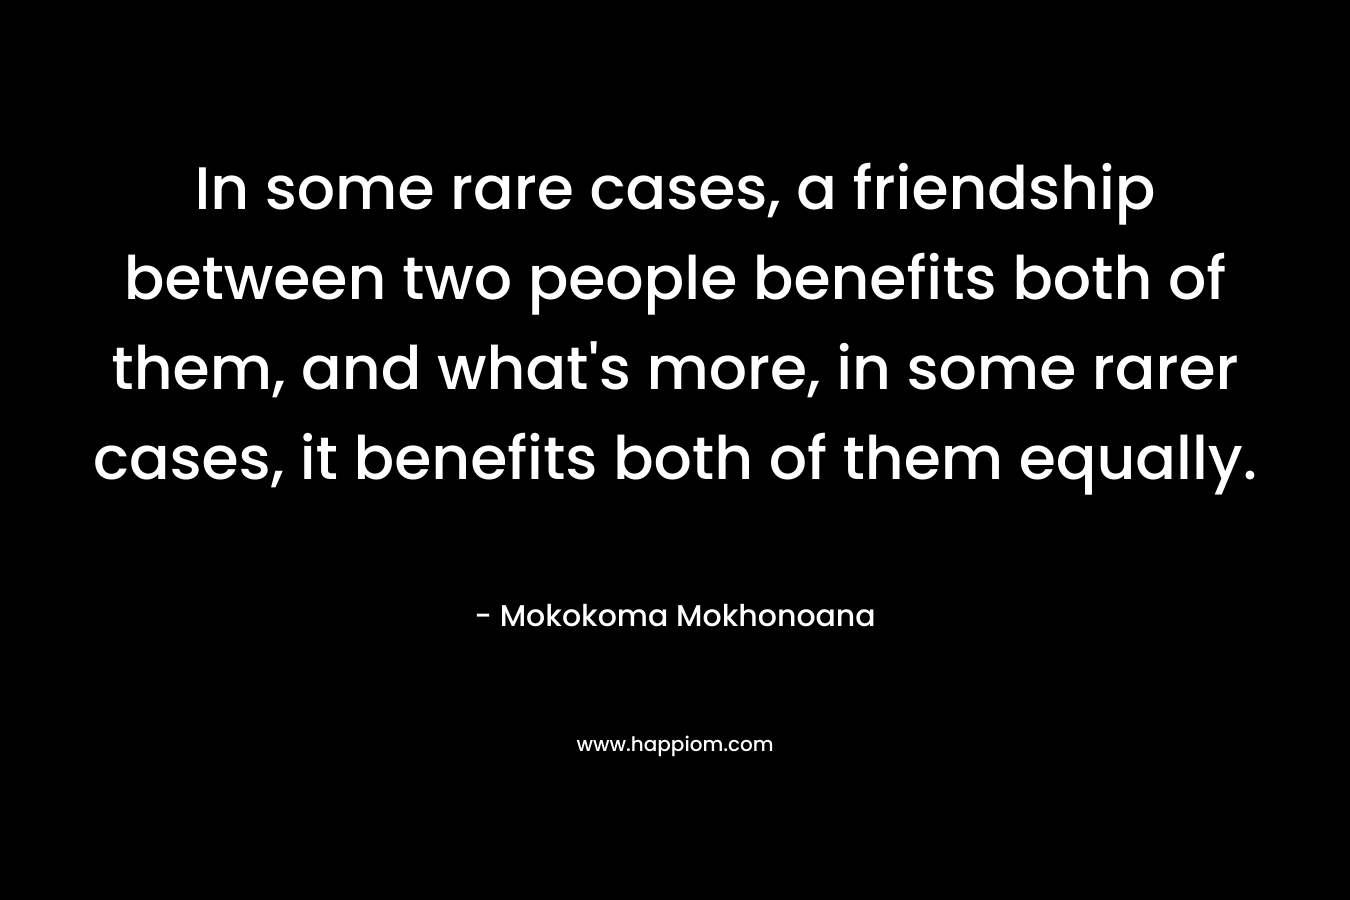 In some rare cases, a friendship between two people benefits both of them, and what’s more, in some rarer cases, it benefits both of them equally. – Mokokoma Mokhonoana